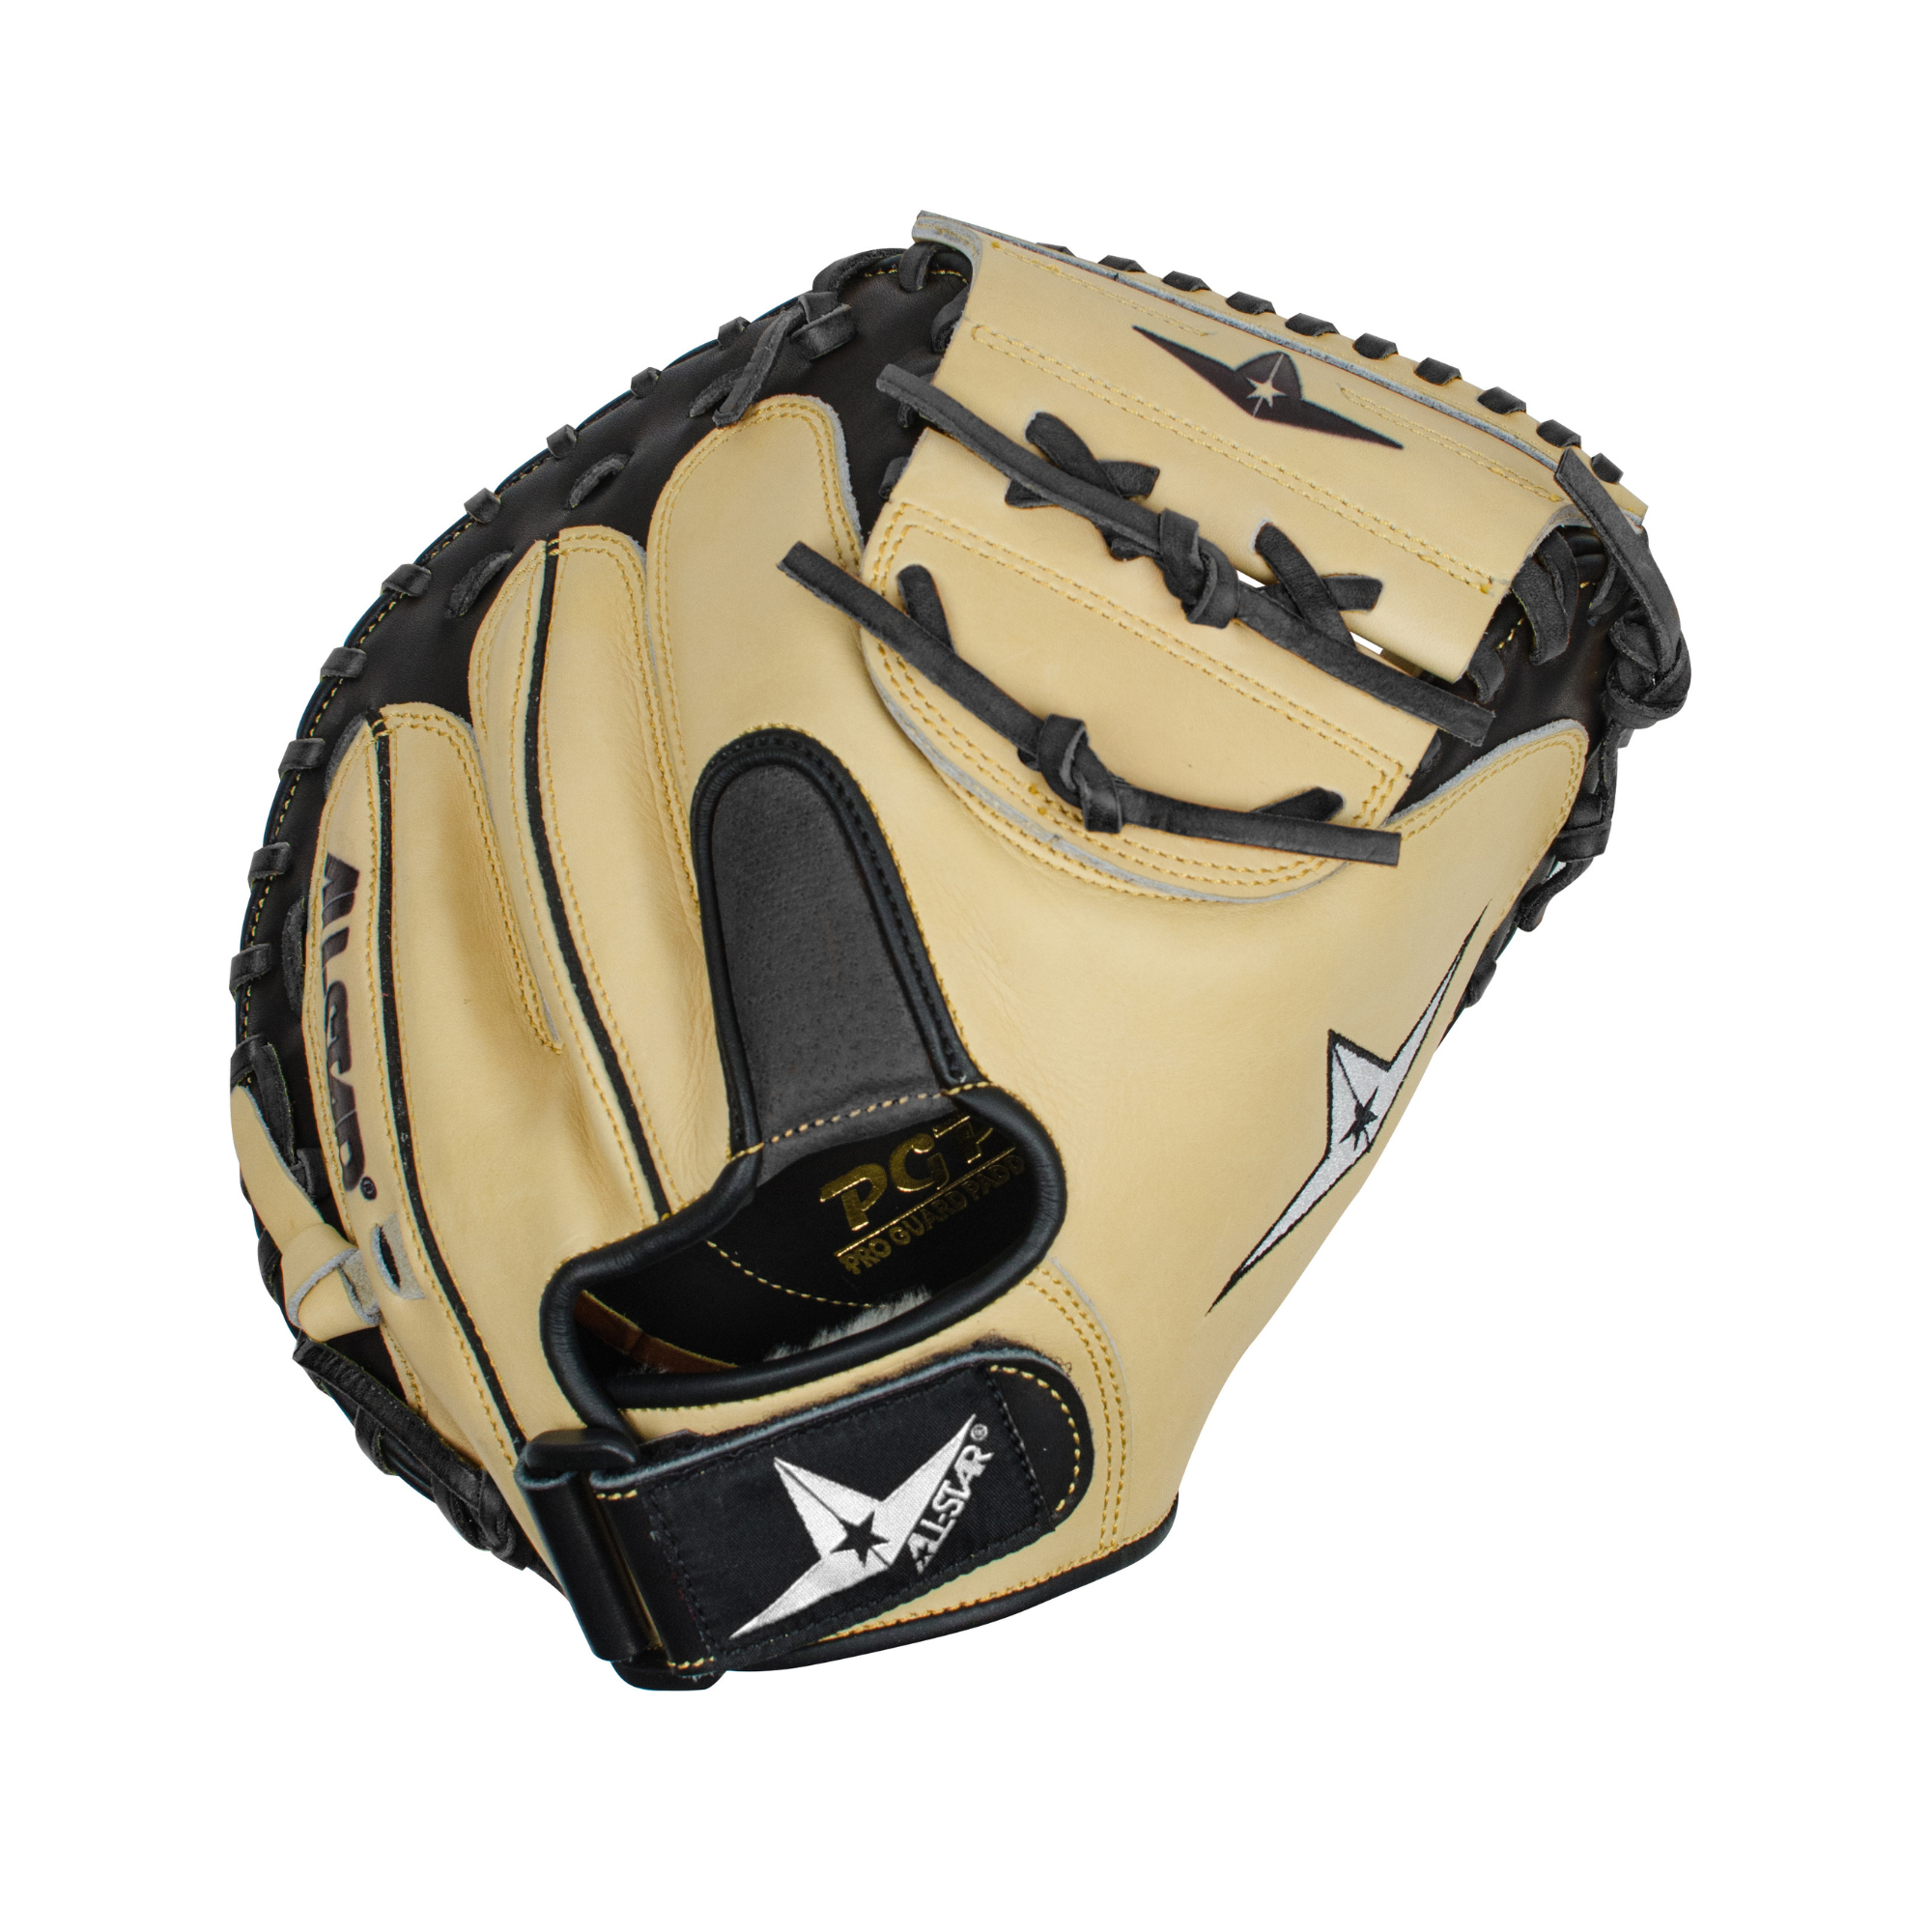 All-Star Youth Pro-Comp Catching Mitt  31.5" RHT